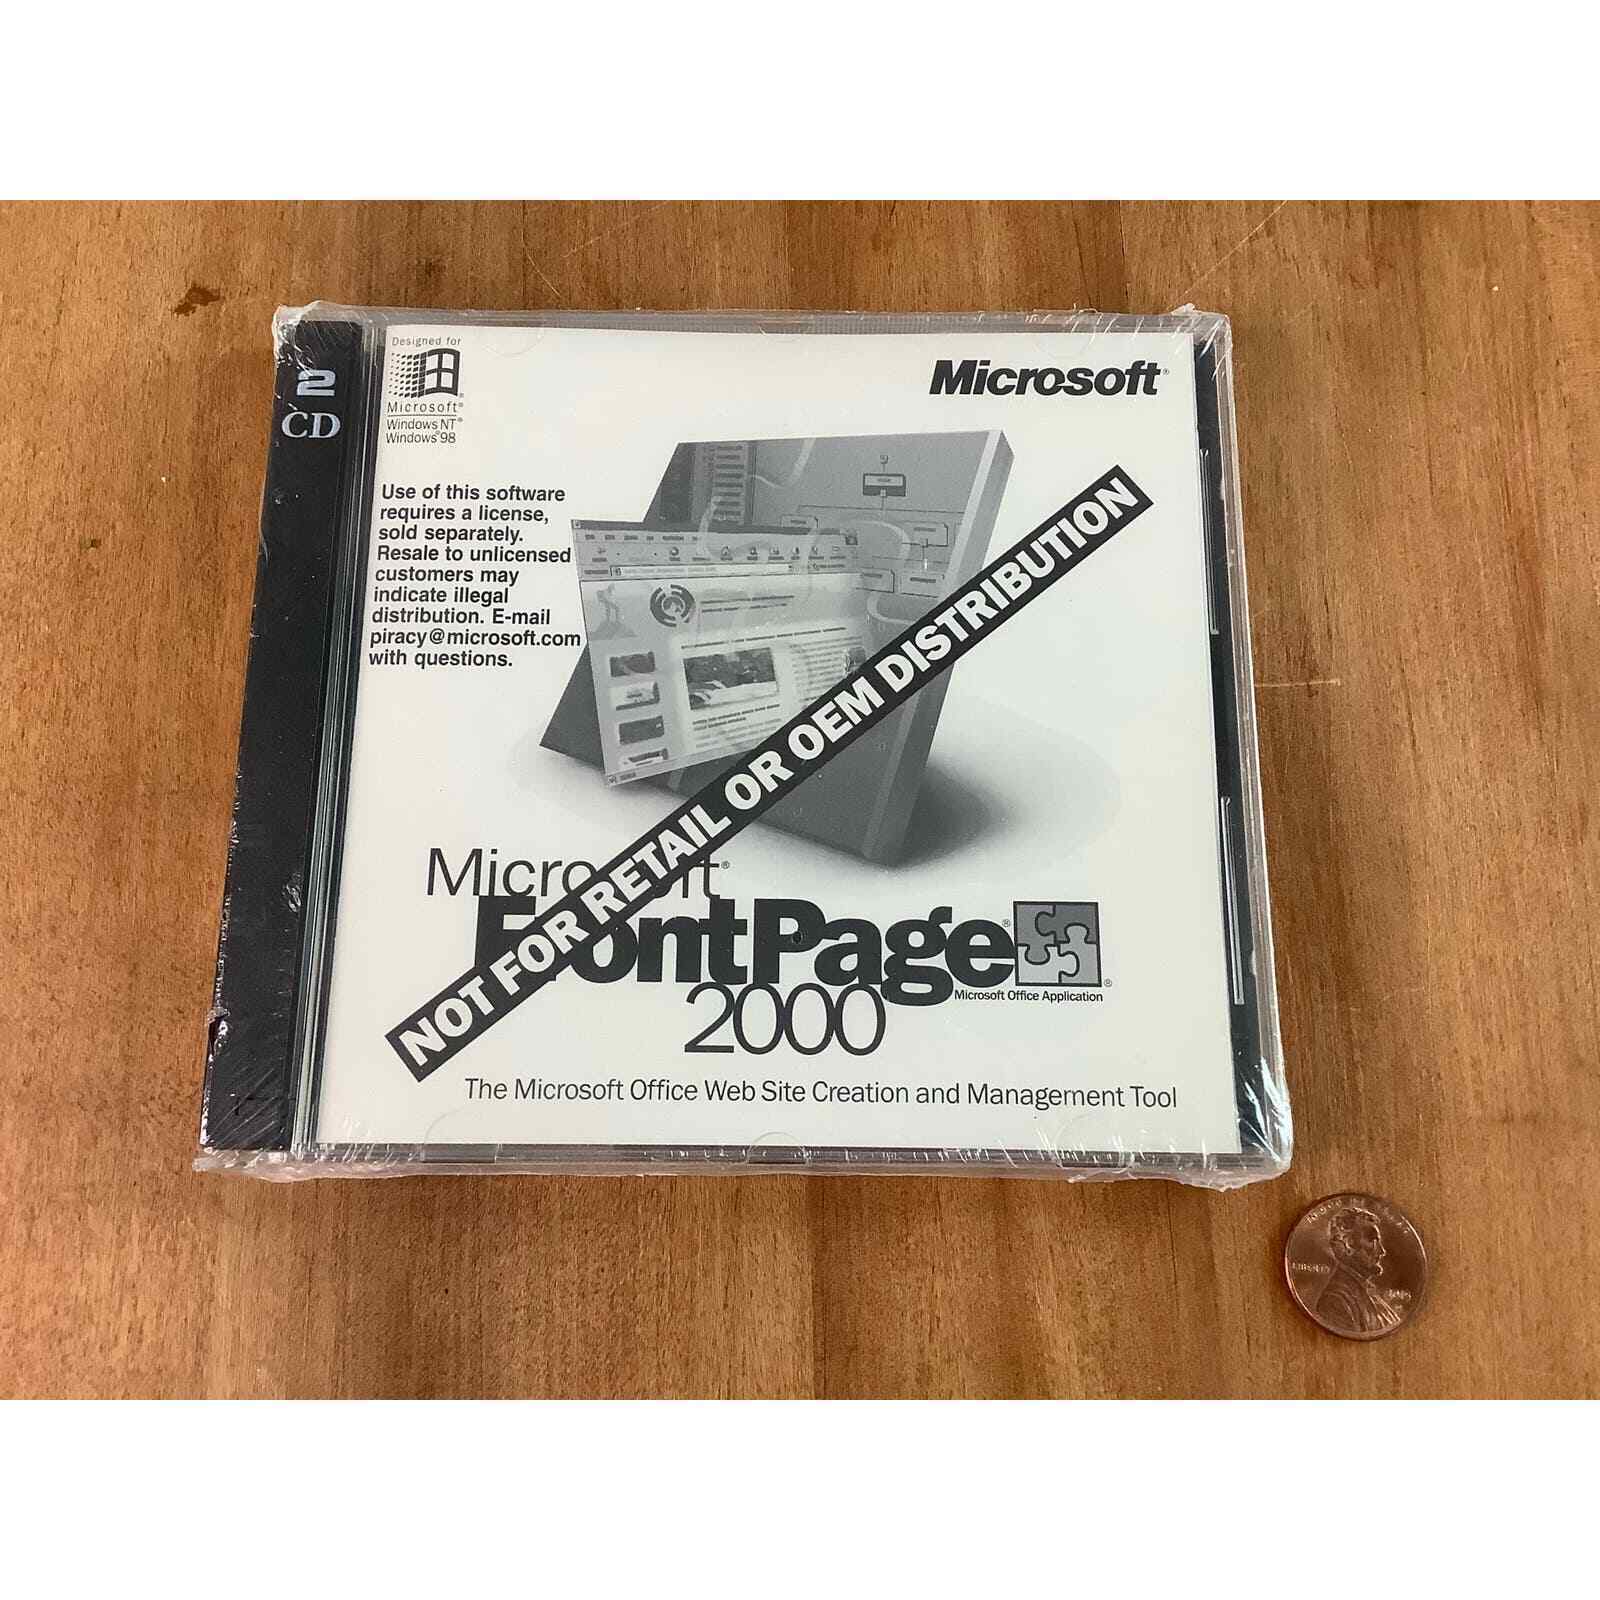 Microsoft Front Page 2000 -New, Unopened